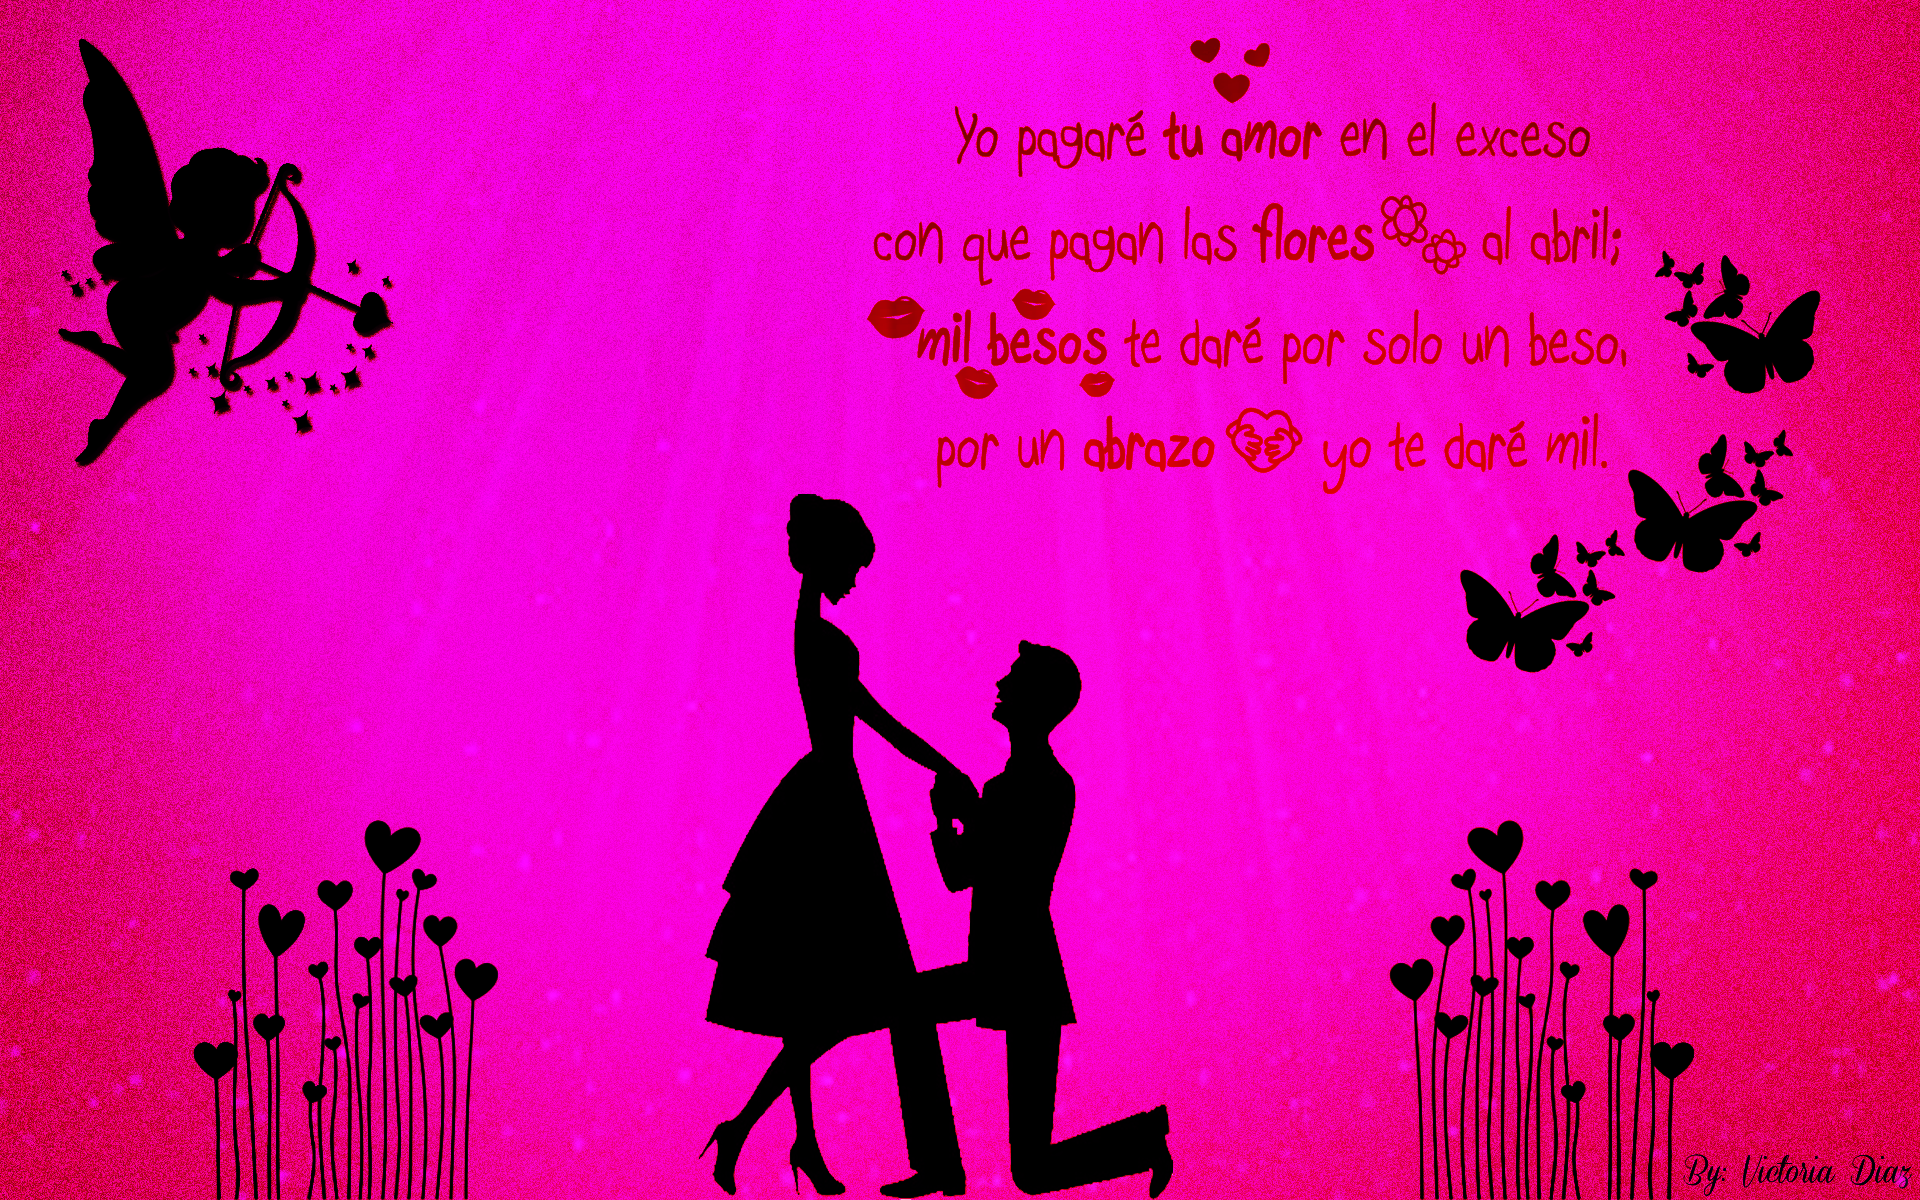 General 1920x1200 quote love pink background pink heart (design) couple men women simple background text Spanish digital art watermarked